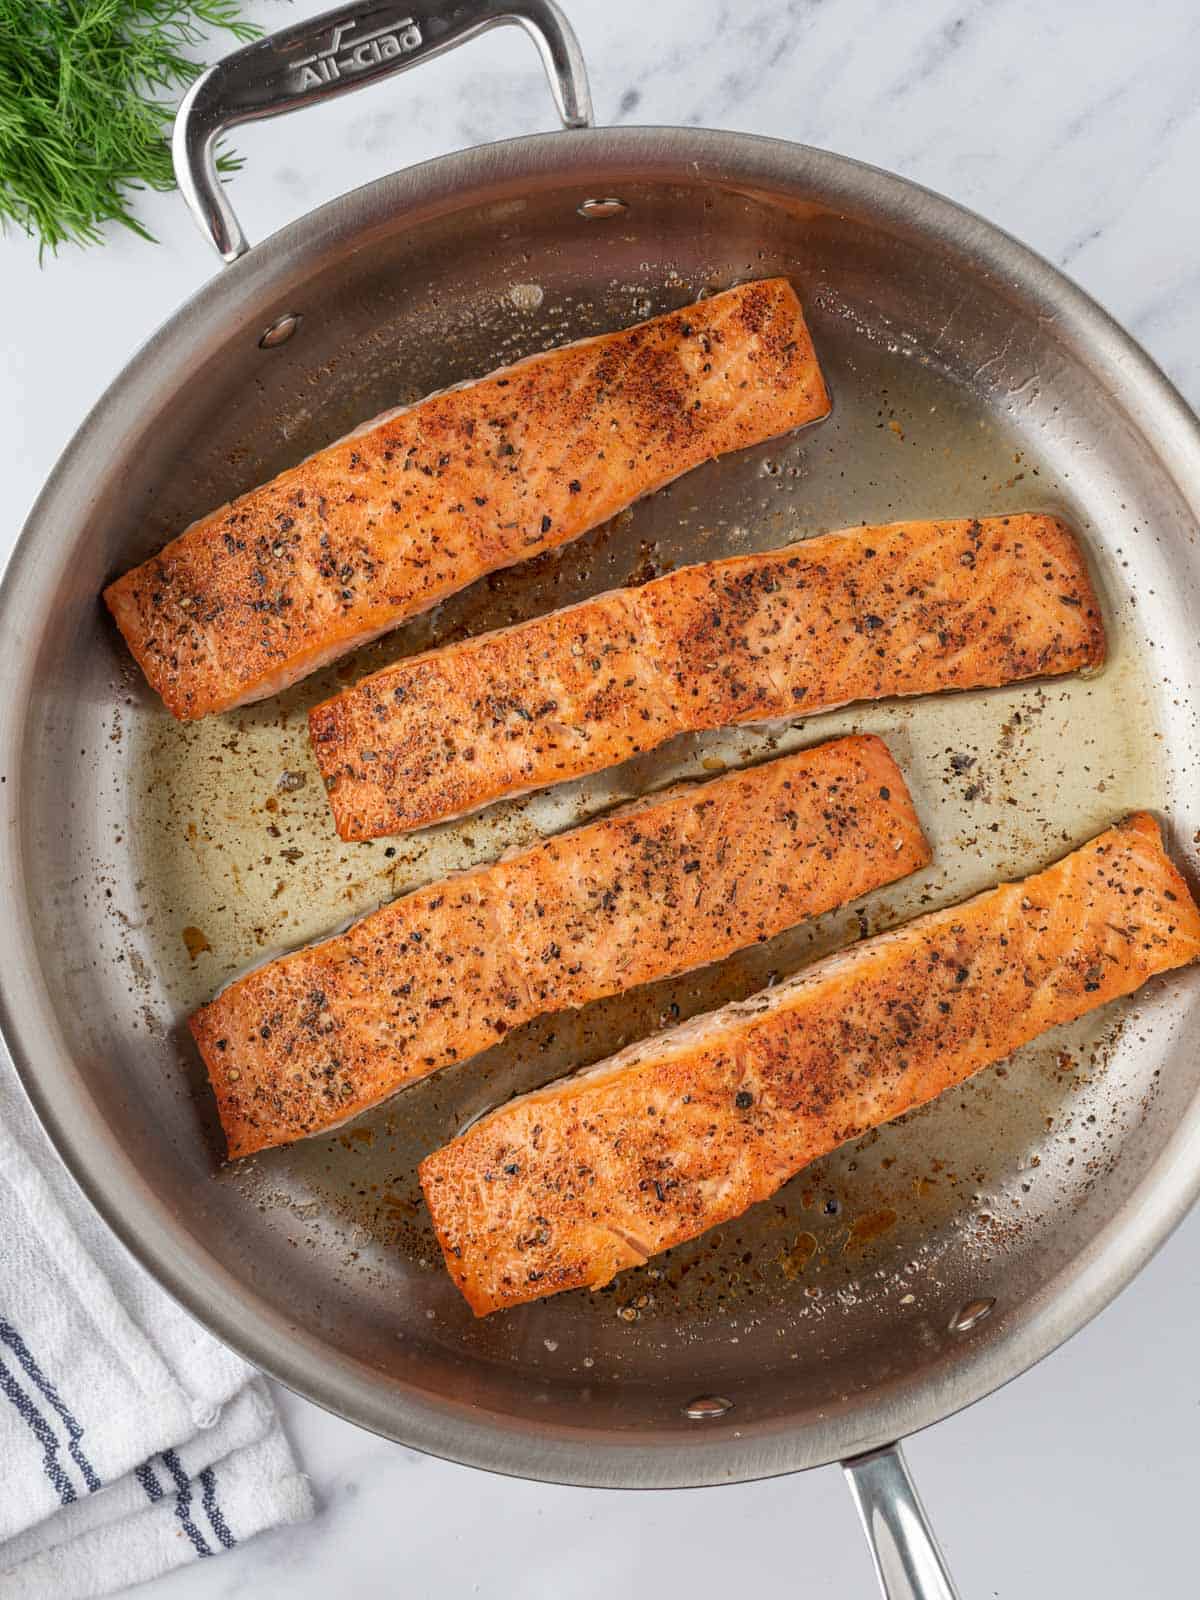 Salmon fillets seared in a pan.